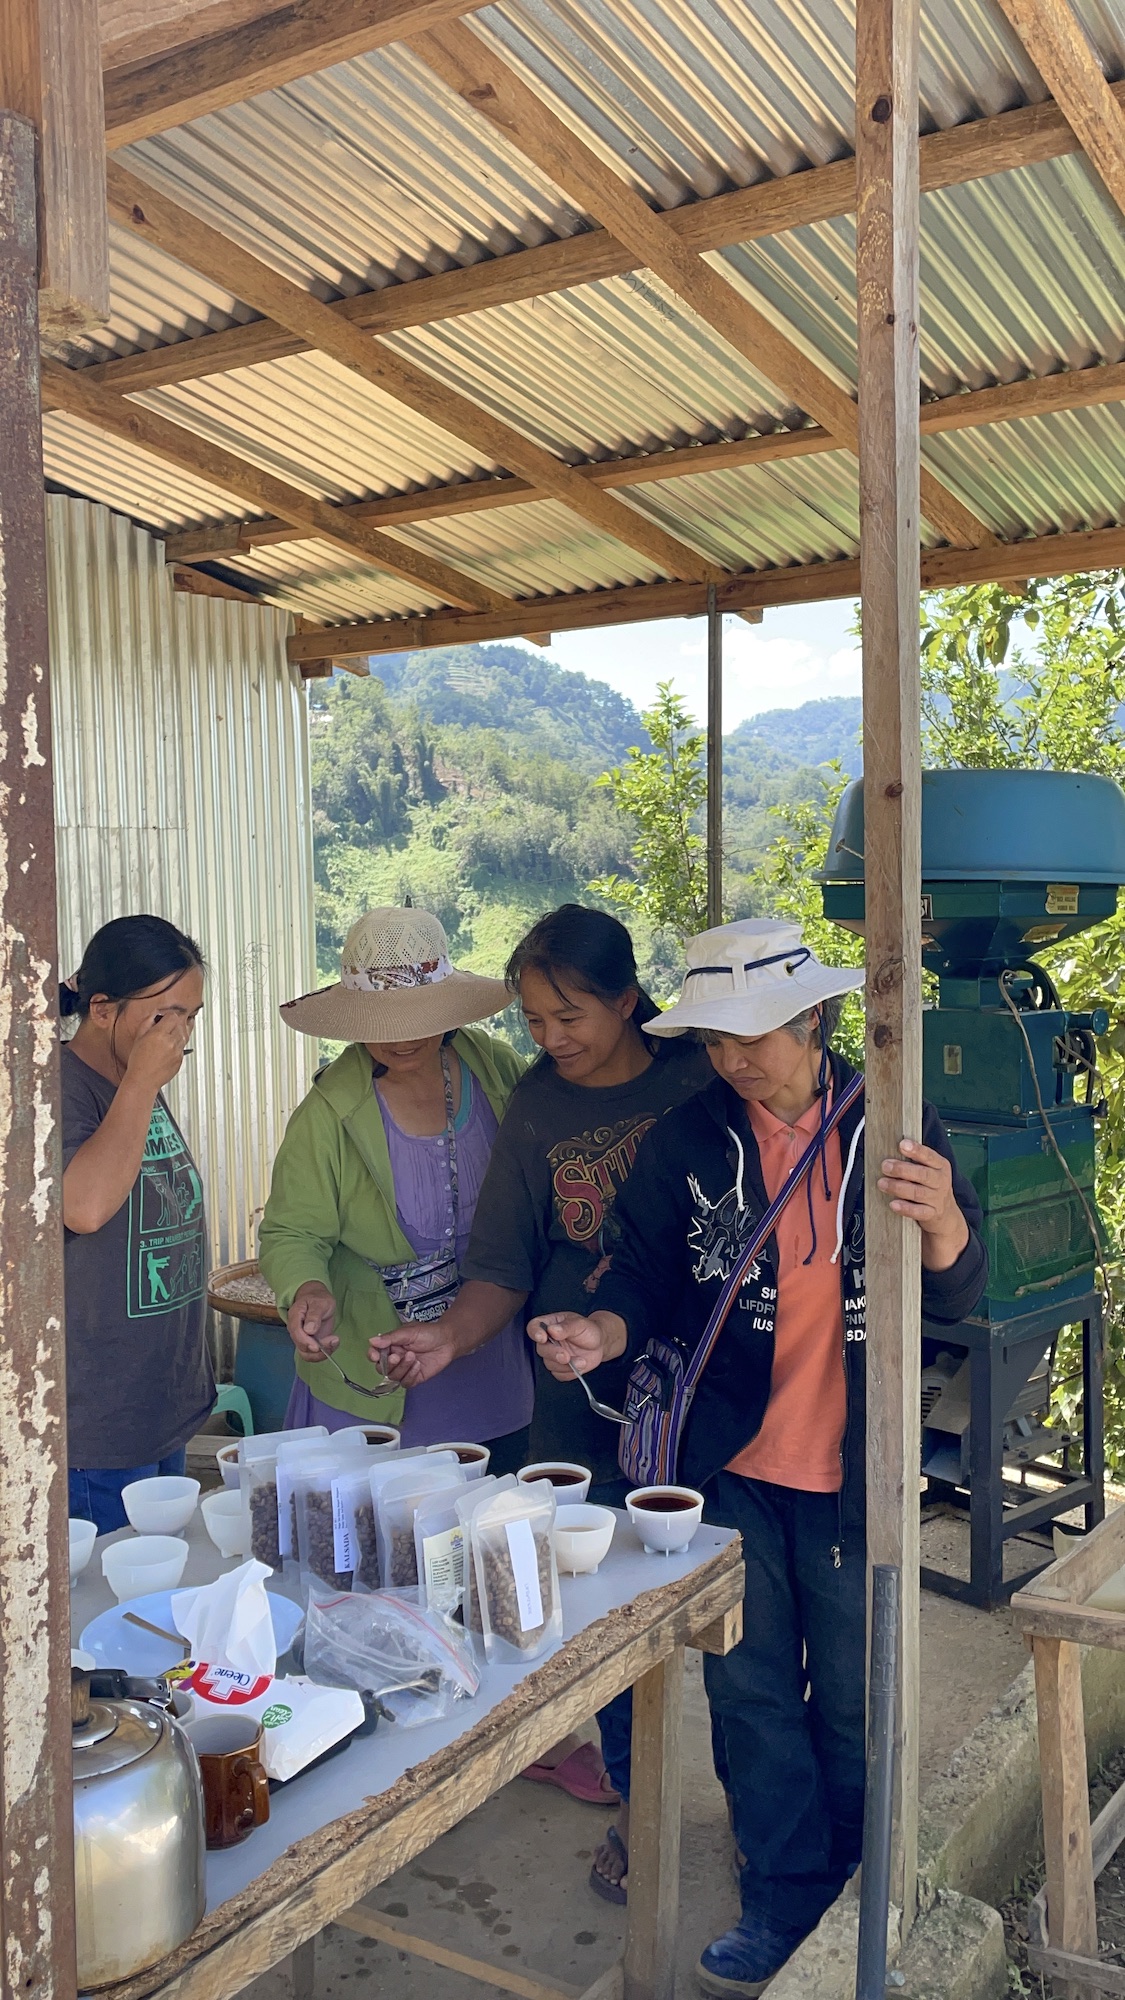 The aunties of Sitio Kisbong, also of Atok, hold a cupping session of their harvest